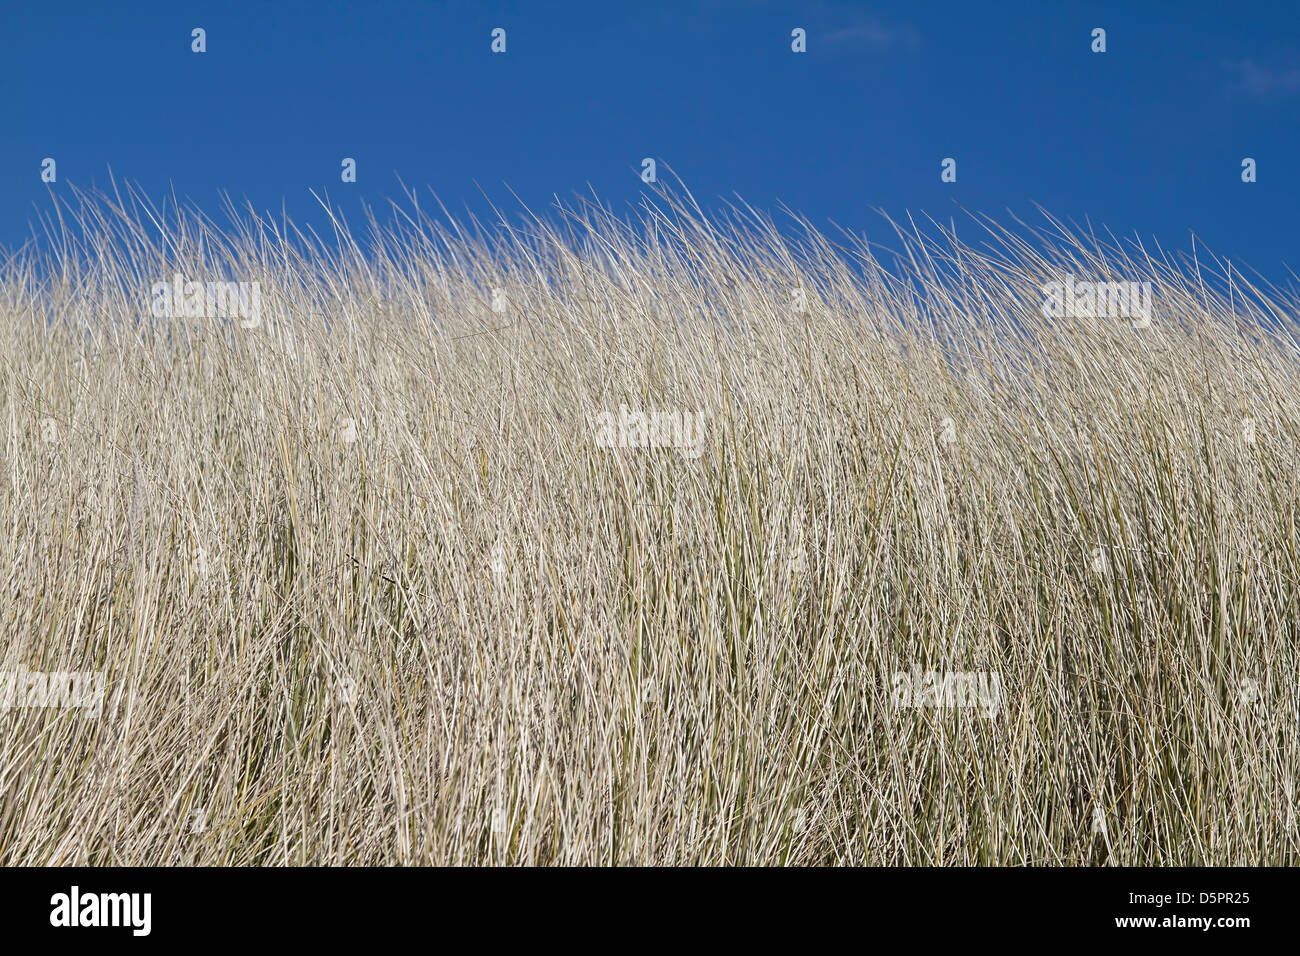 Tall grass on sand dunes with blue sky Stock Photo